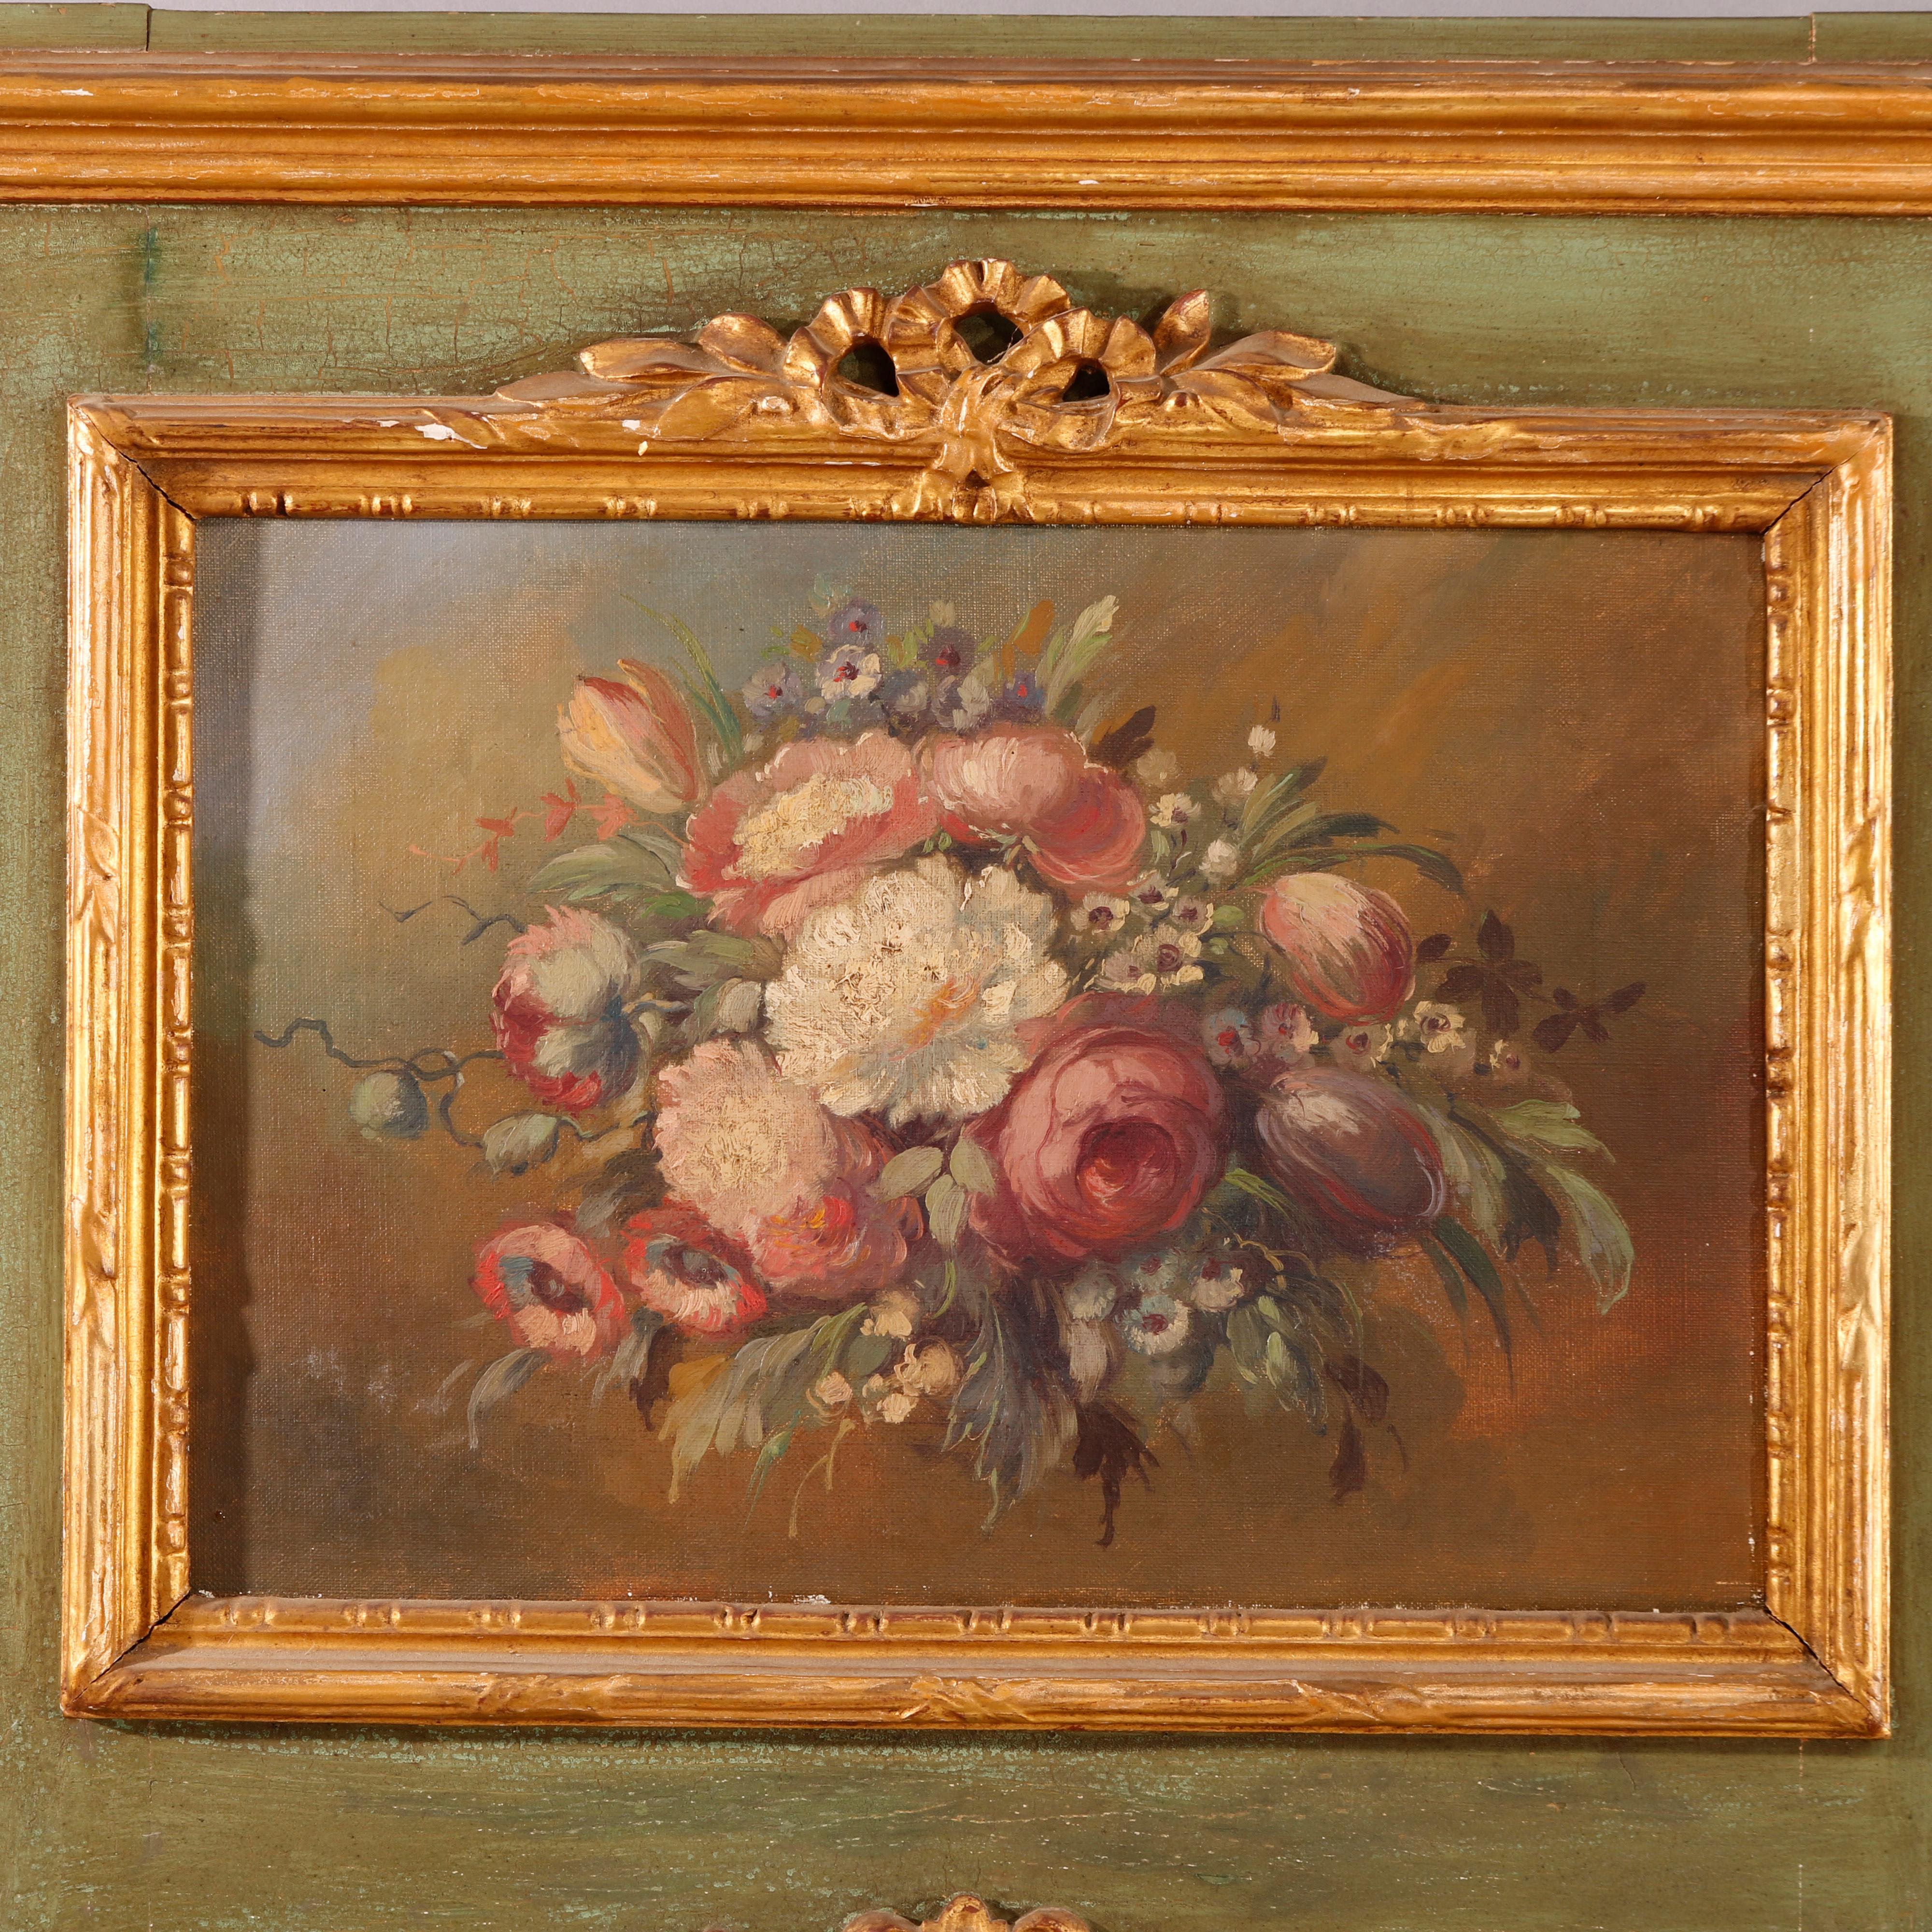 Painted Large Antique French Parcel Gilt Trumeau Wall Mirror with Floral Reserve, 18th C